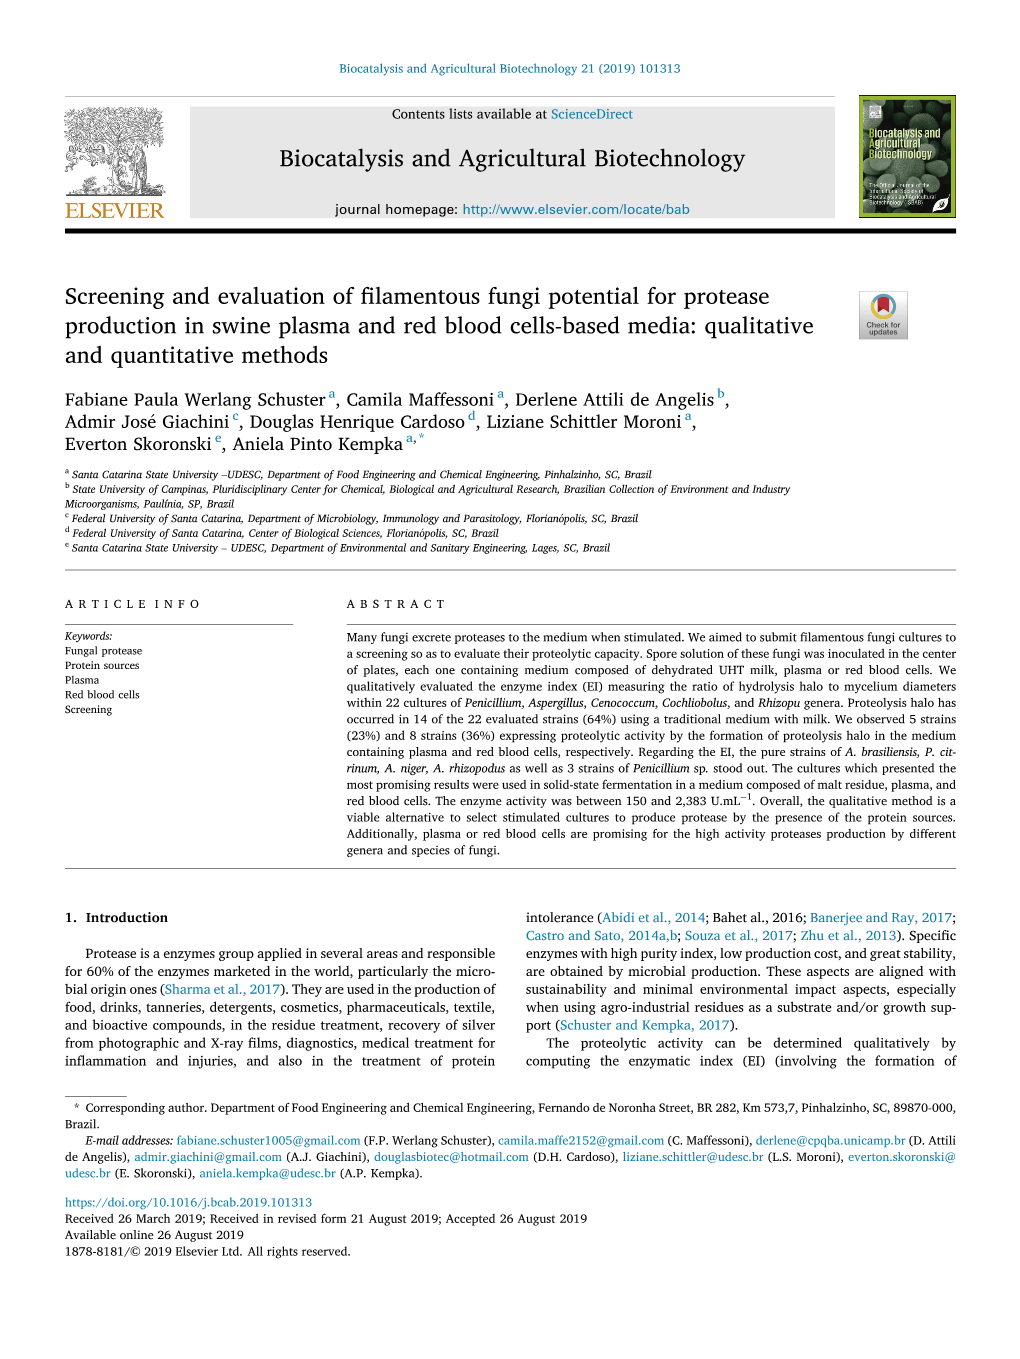 Screening and Evaluation of Filamentous Fungi Potential for Protease Production in Swine Plasma and Red Blood Cells-Based Media: Qualitative and Quantitative Methods